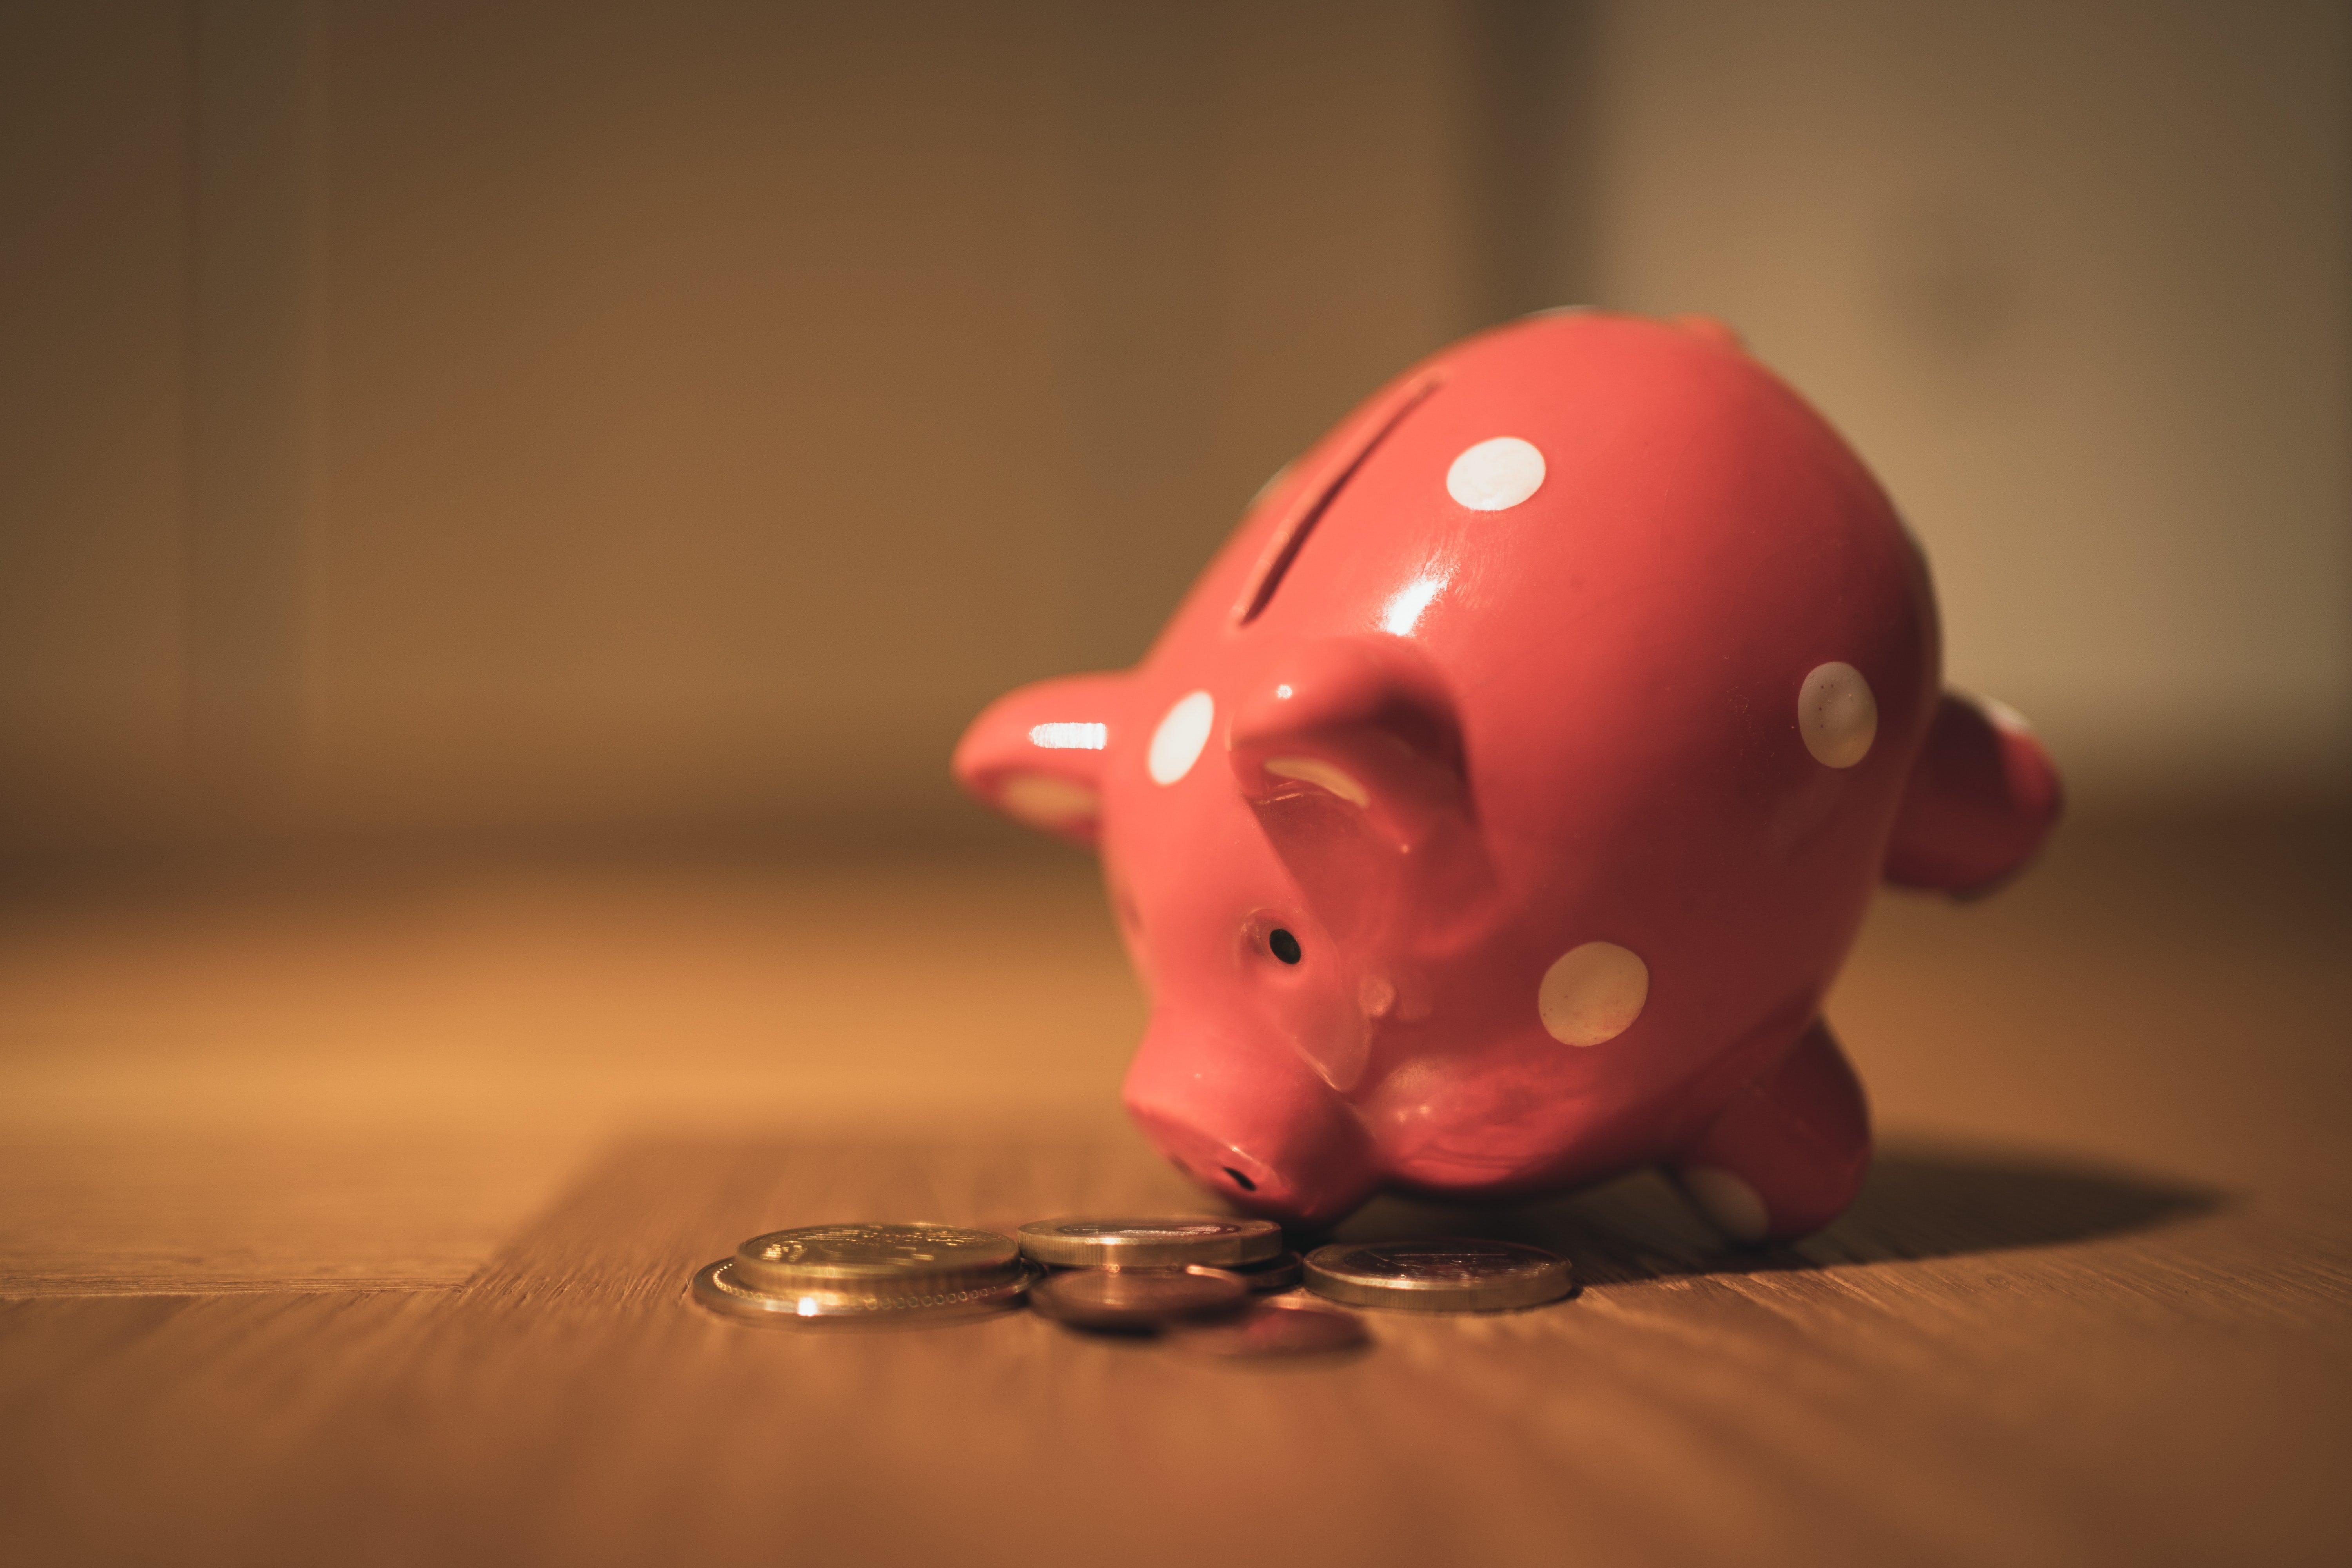 Mindy wanted to get money from her piggy bank. | Source: Unsplash